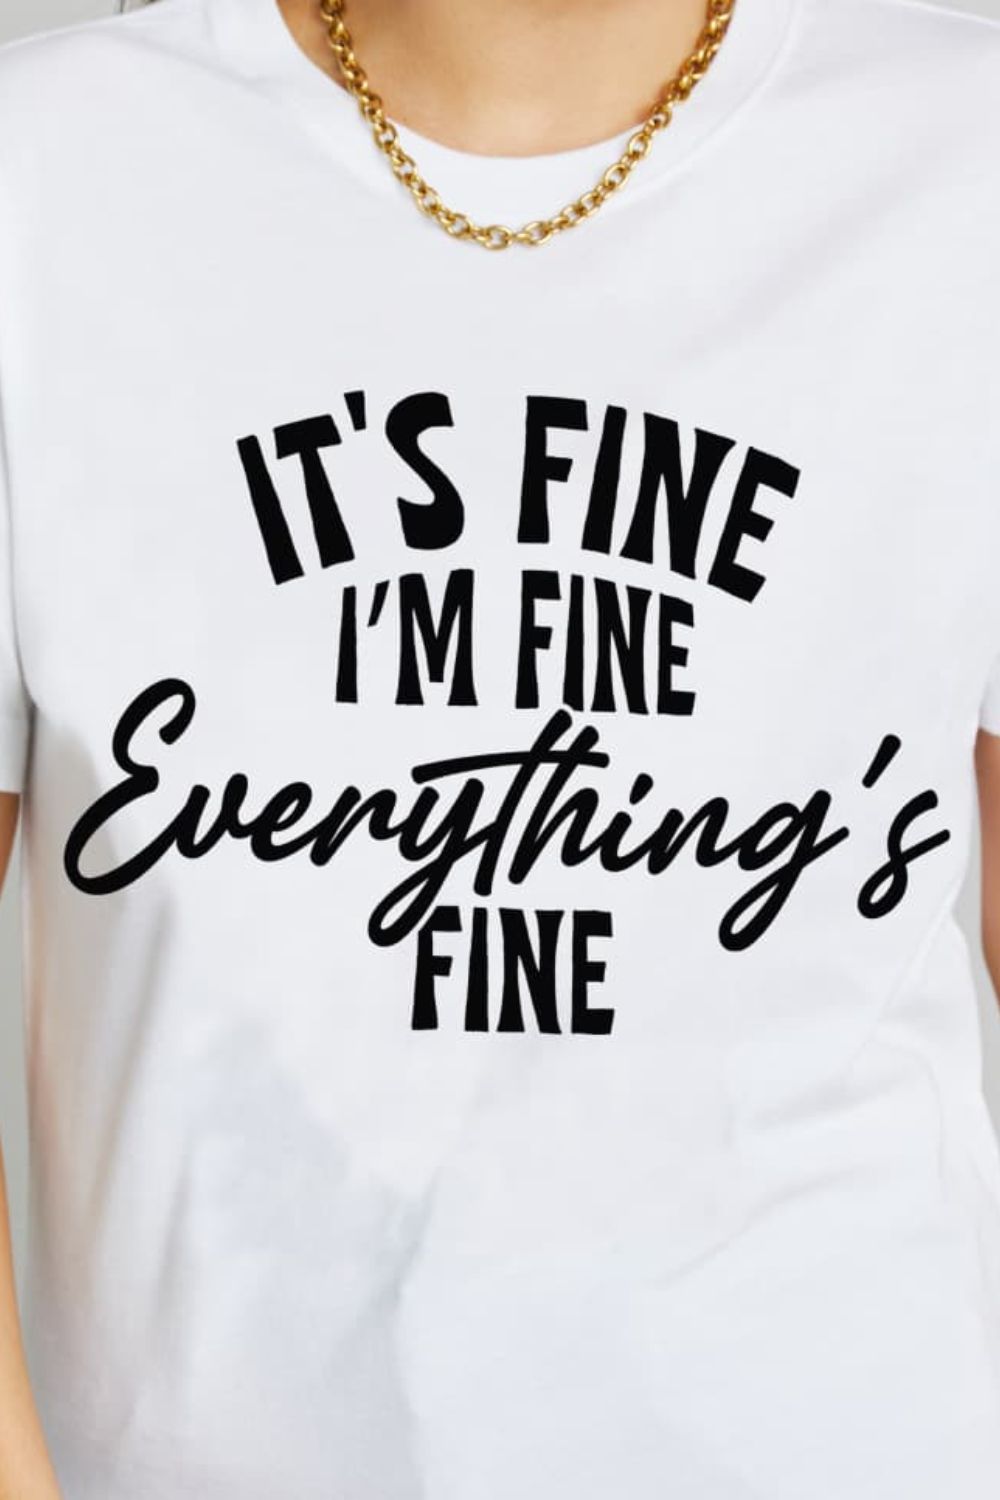 Simply Love Full Size IT'S FINE I'M FINE EVERYTHING'S FINE Graphic Cotton T-Shirt